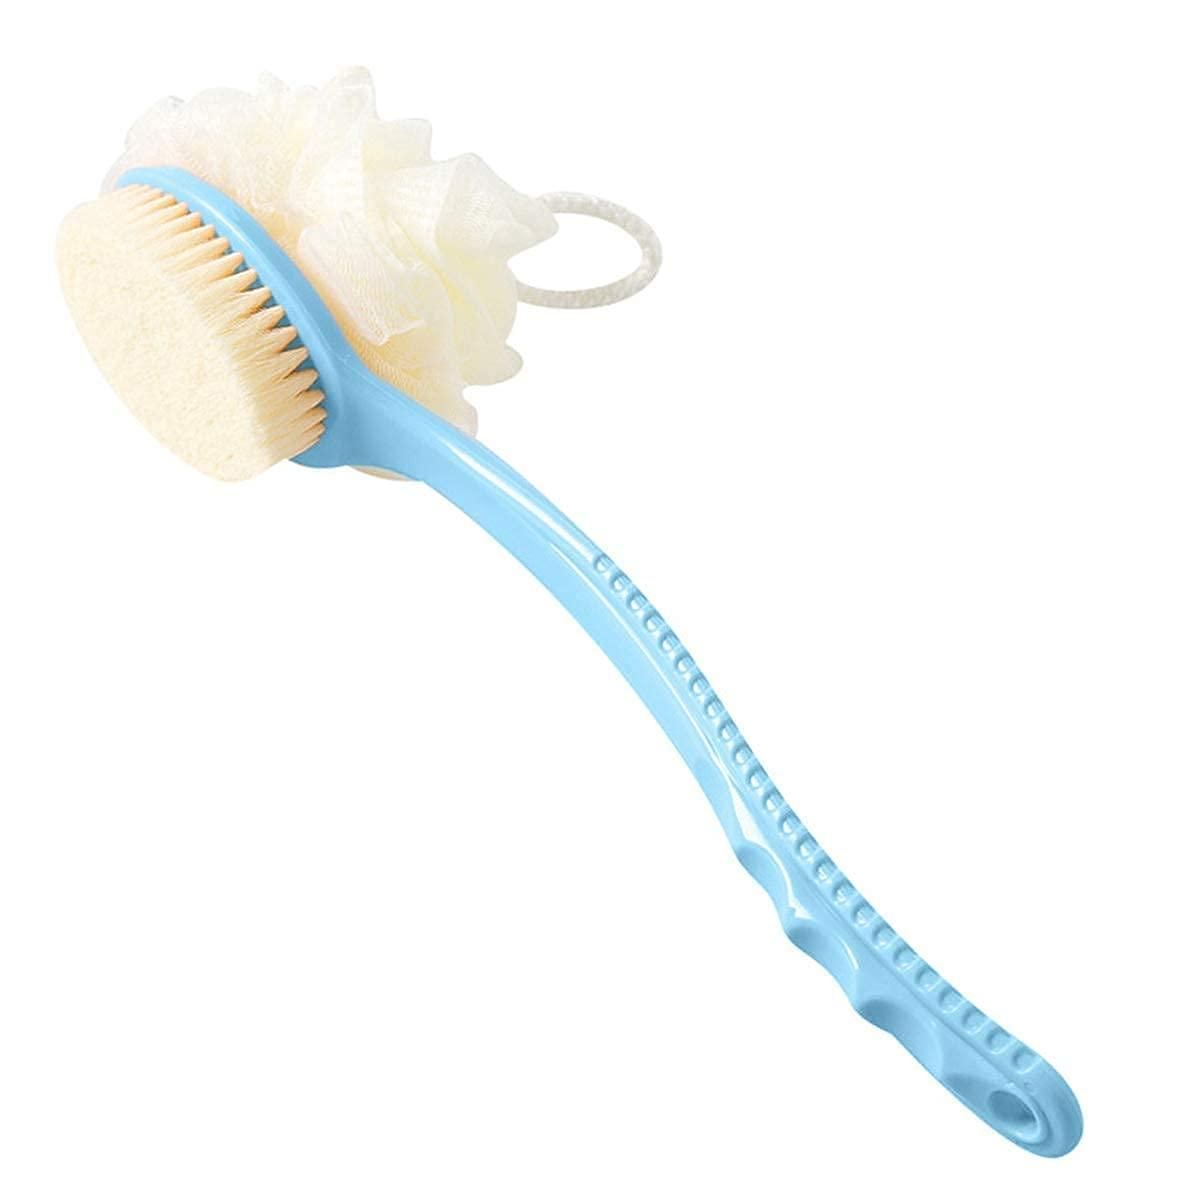 Arcreactor Zone 2 IN 1 loofah with handle, Bath Brush, back scrubber, Bath Brush with Soft Comfortable Bristles And Loofah with handle, Double Sided Bath Brush Scrubber for bathing(Pack of 2) - Gymom Wellness Warehouse 